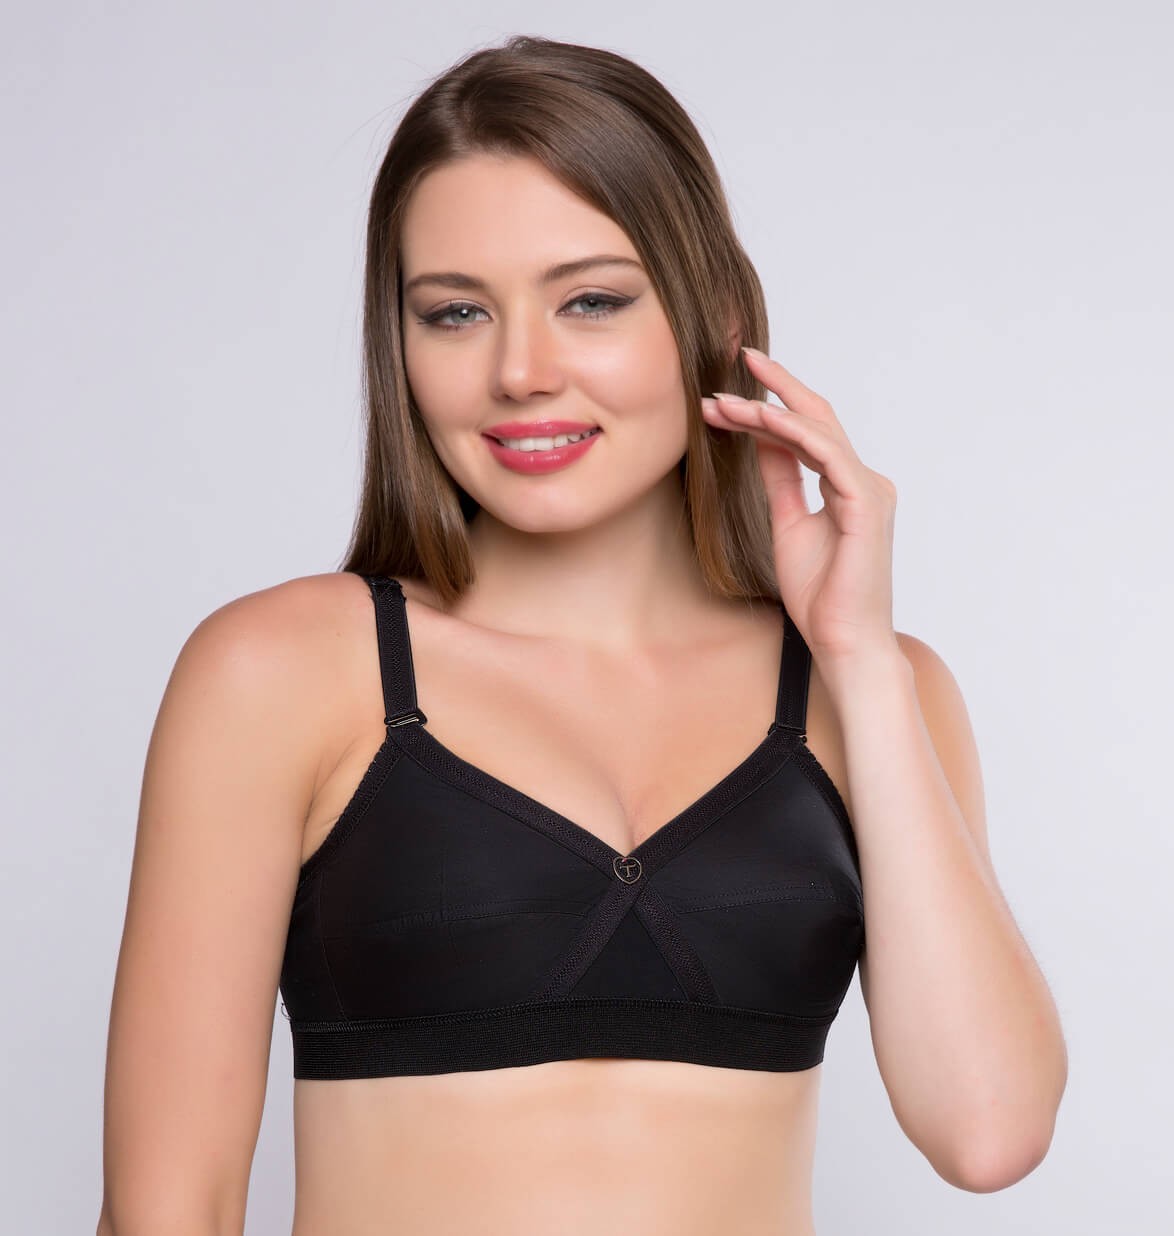 Trylo Intimates on X: Krutika Plain is India's most popular bra for a  reason. It's made of 100% cotton, so it's super soft and comfortable.  Product shown- Krutika Plain #TryloIndia #TryloIntimates #RizaIntimates #